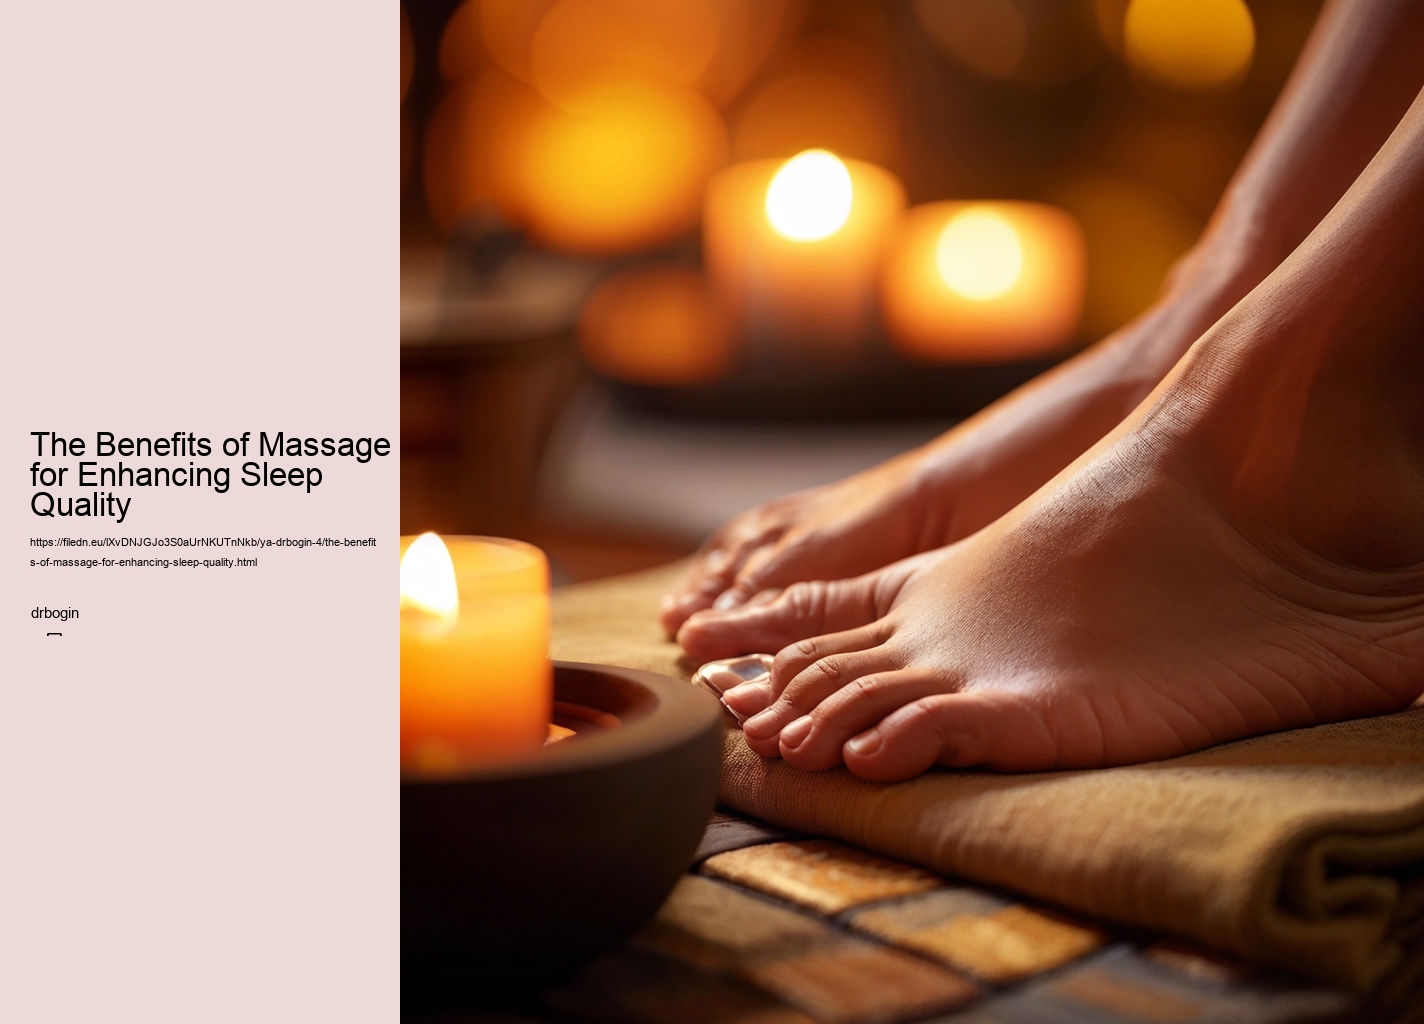 The Benefits of Massage for Enhancing Sleep Quality